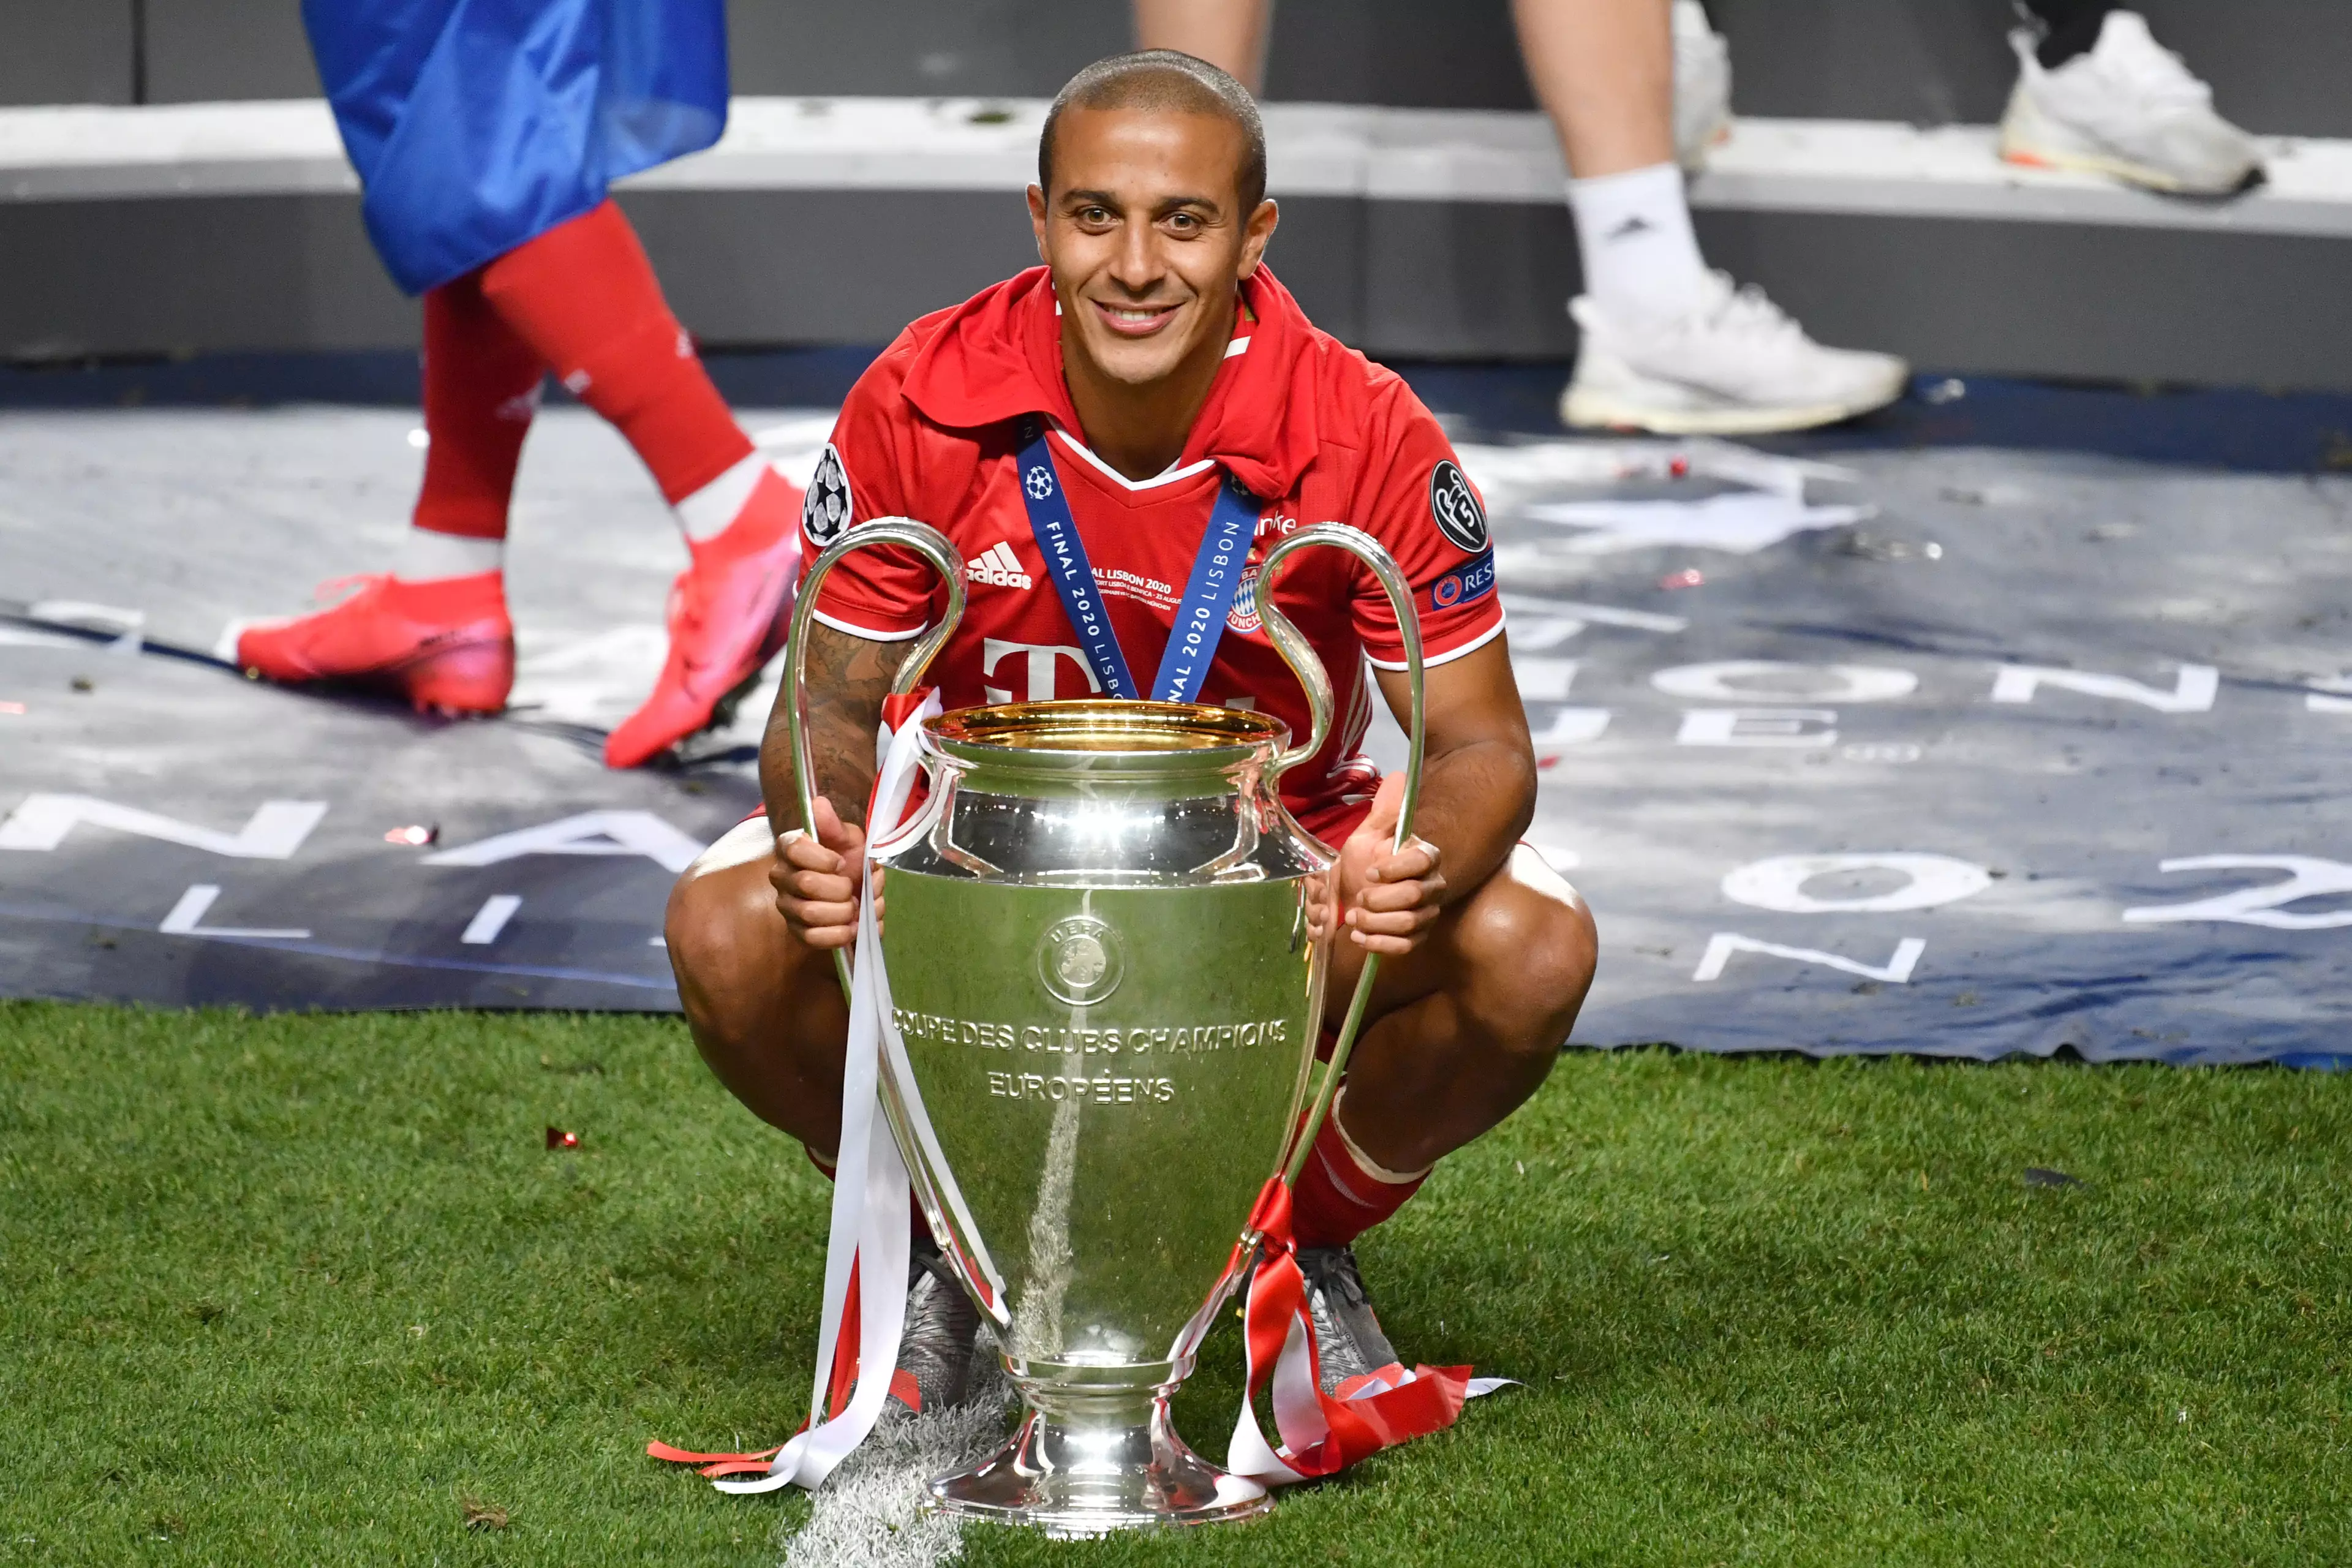 Thiago with the Champions League trophy. Image: PA Images